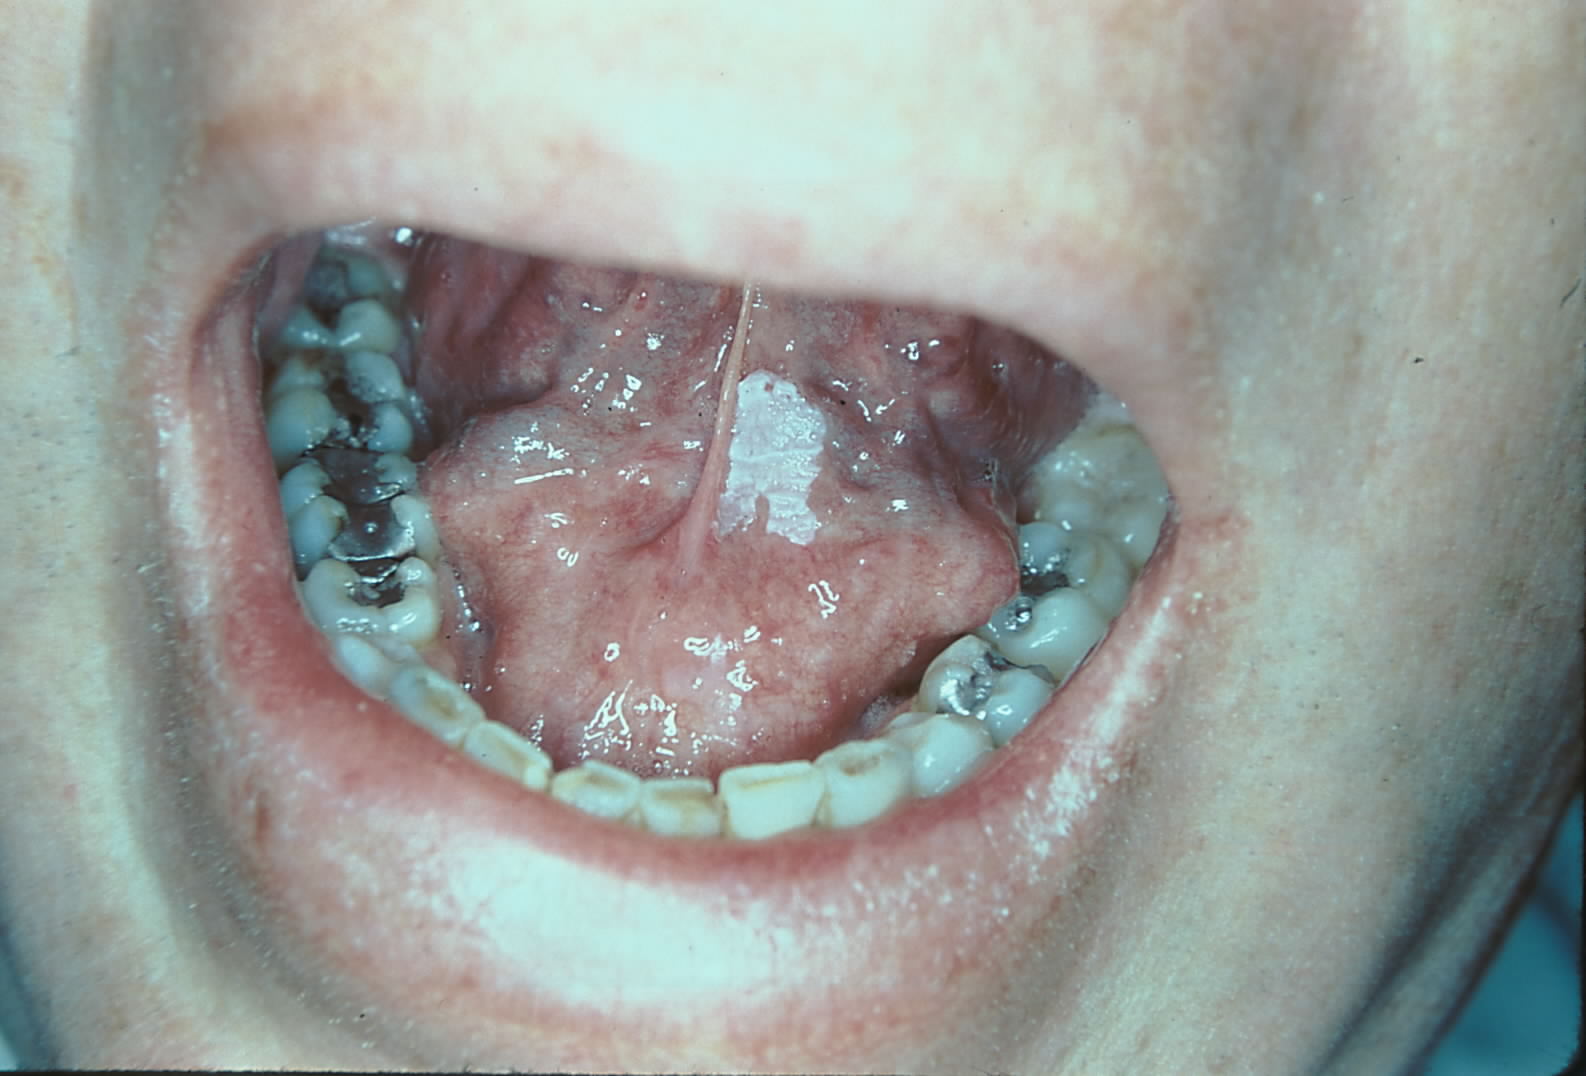 Image of the floor of the mouth with leukoplakia.